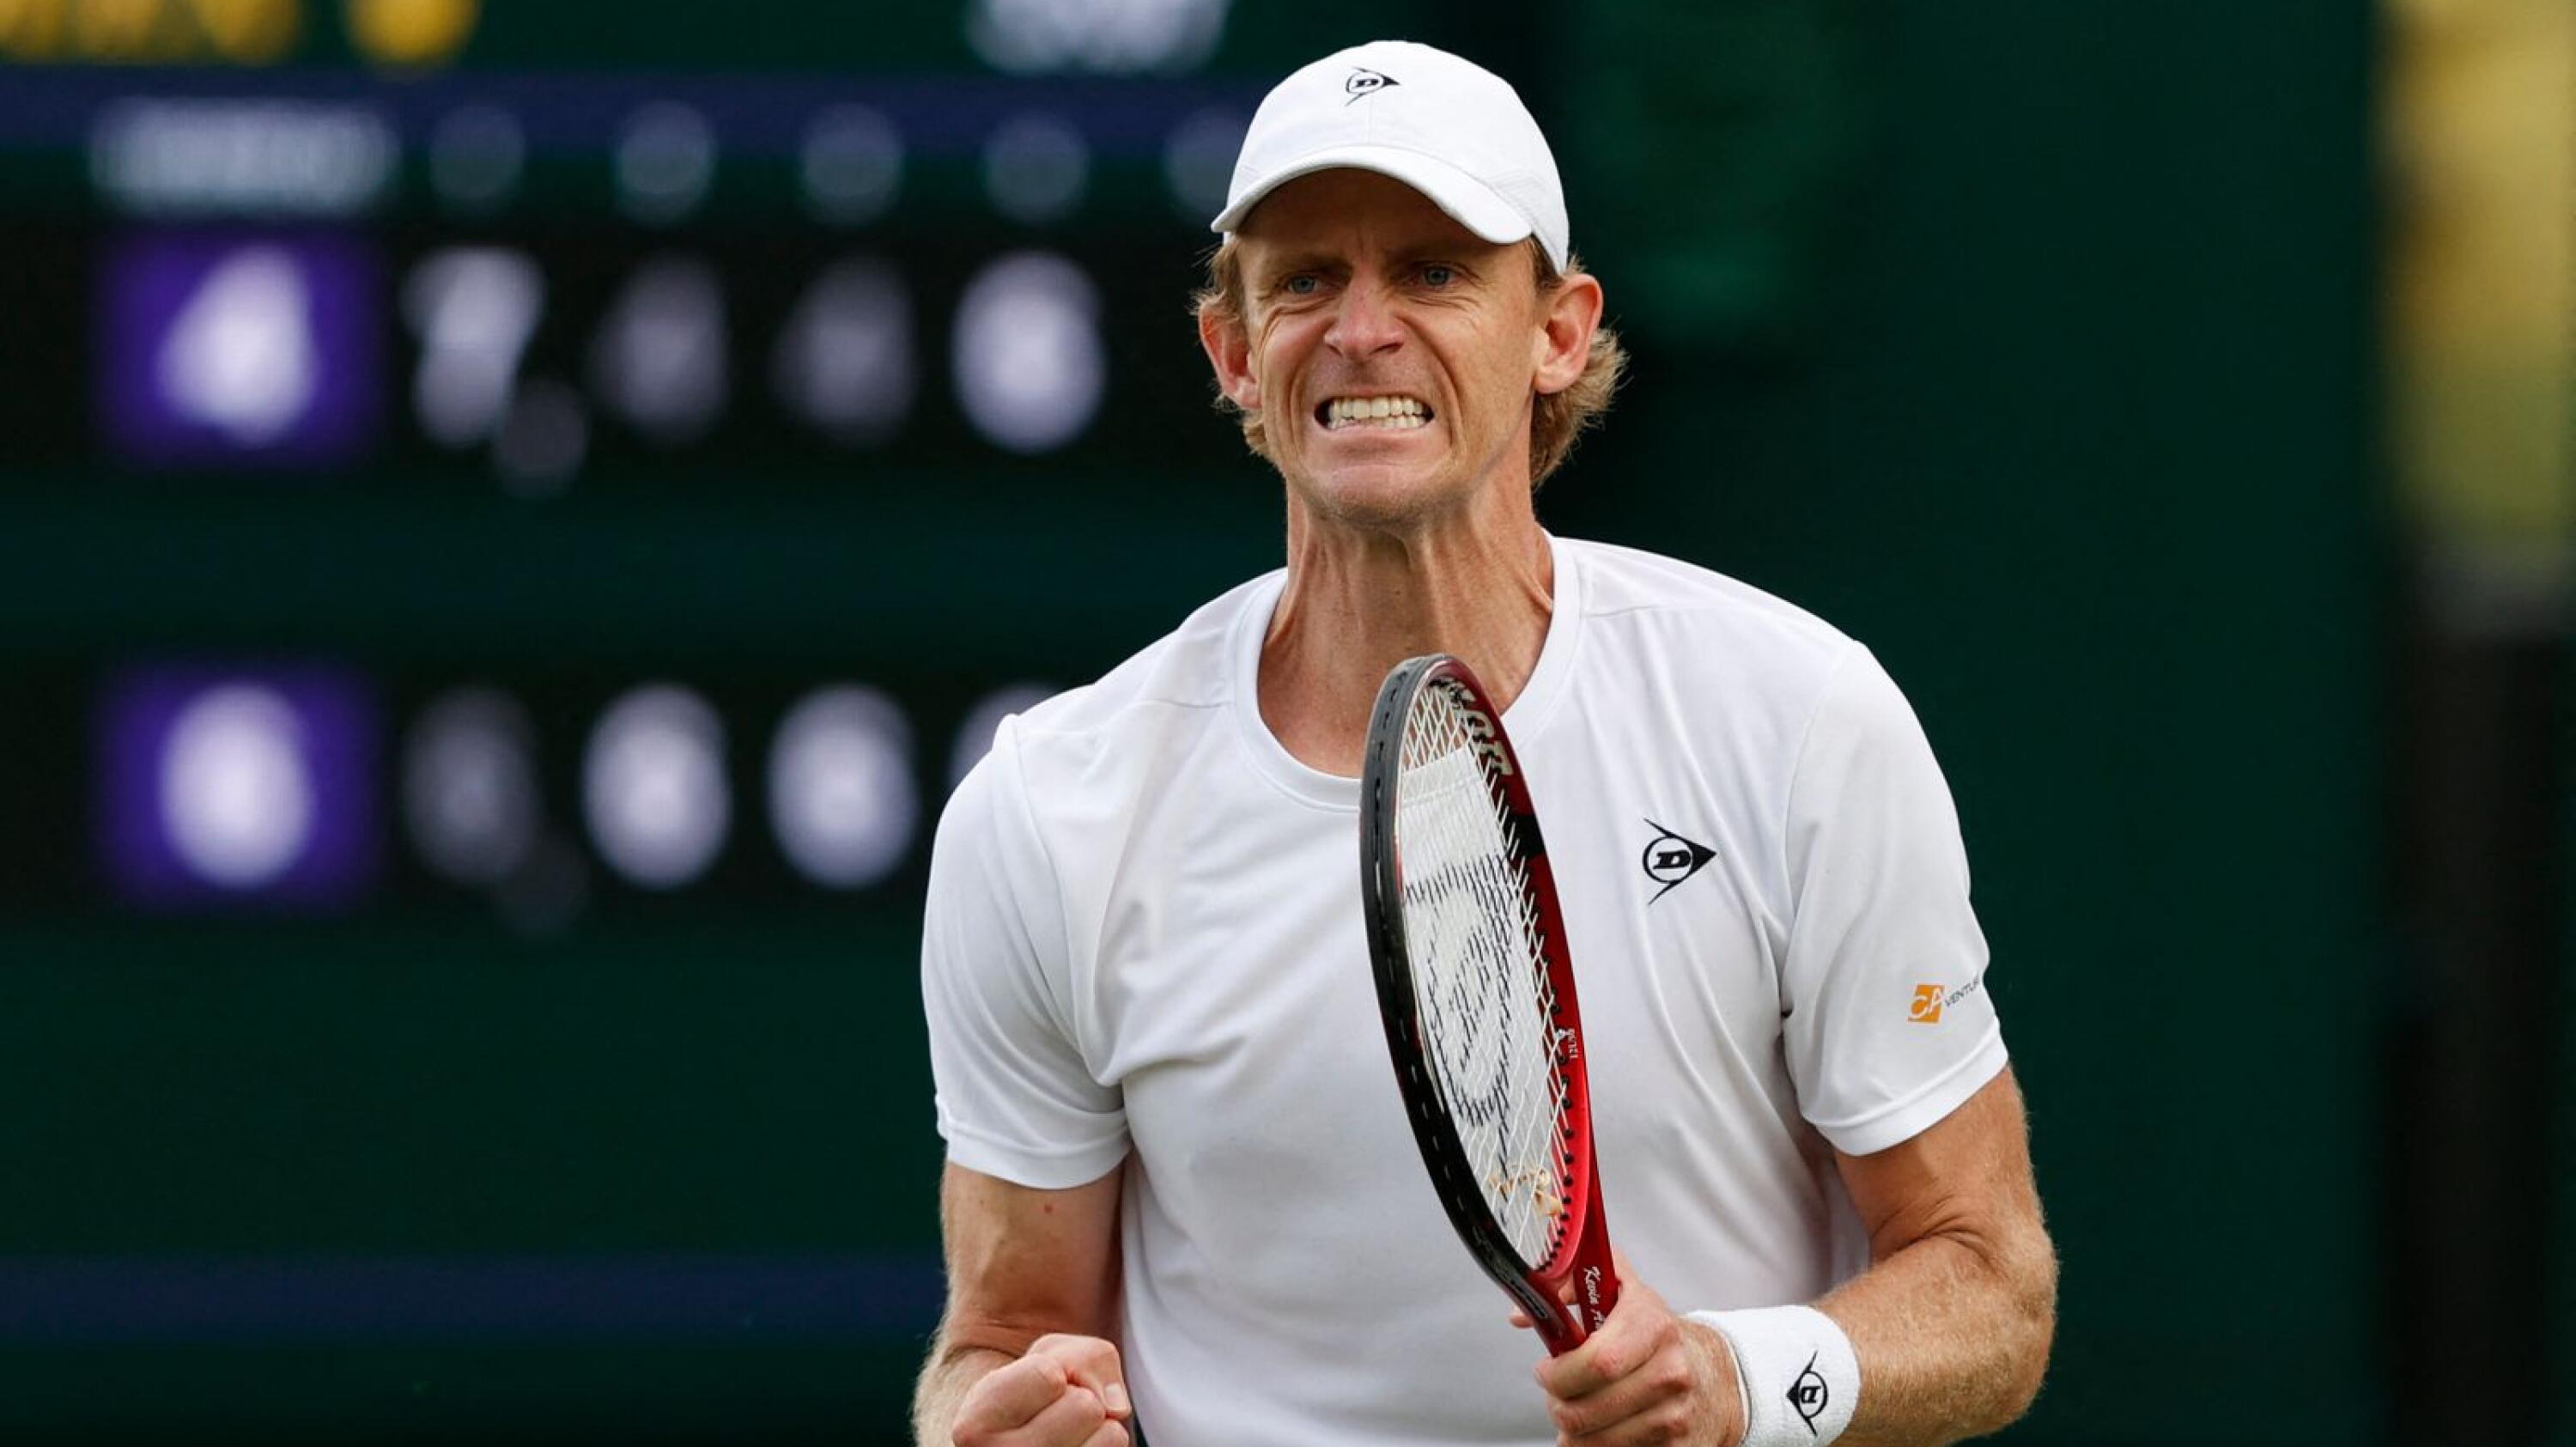 South Africa's Kevin Anderson reacts while playing Chile's Marcelo Tomas Barrios Vera on the first day of the 2021 Wimbledon Championships at the The All England Tennis Club in Wimbledon, southwest London, on June 28, 2021